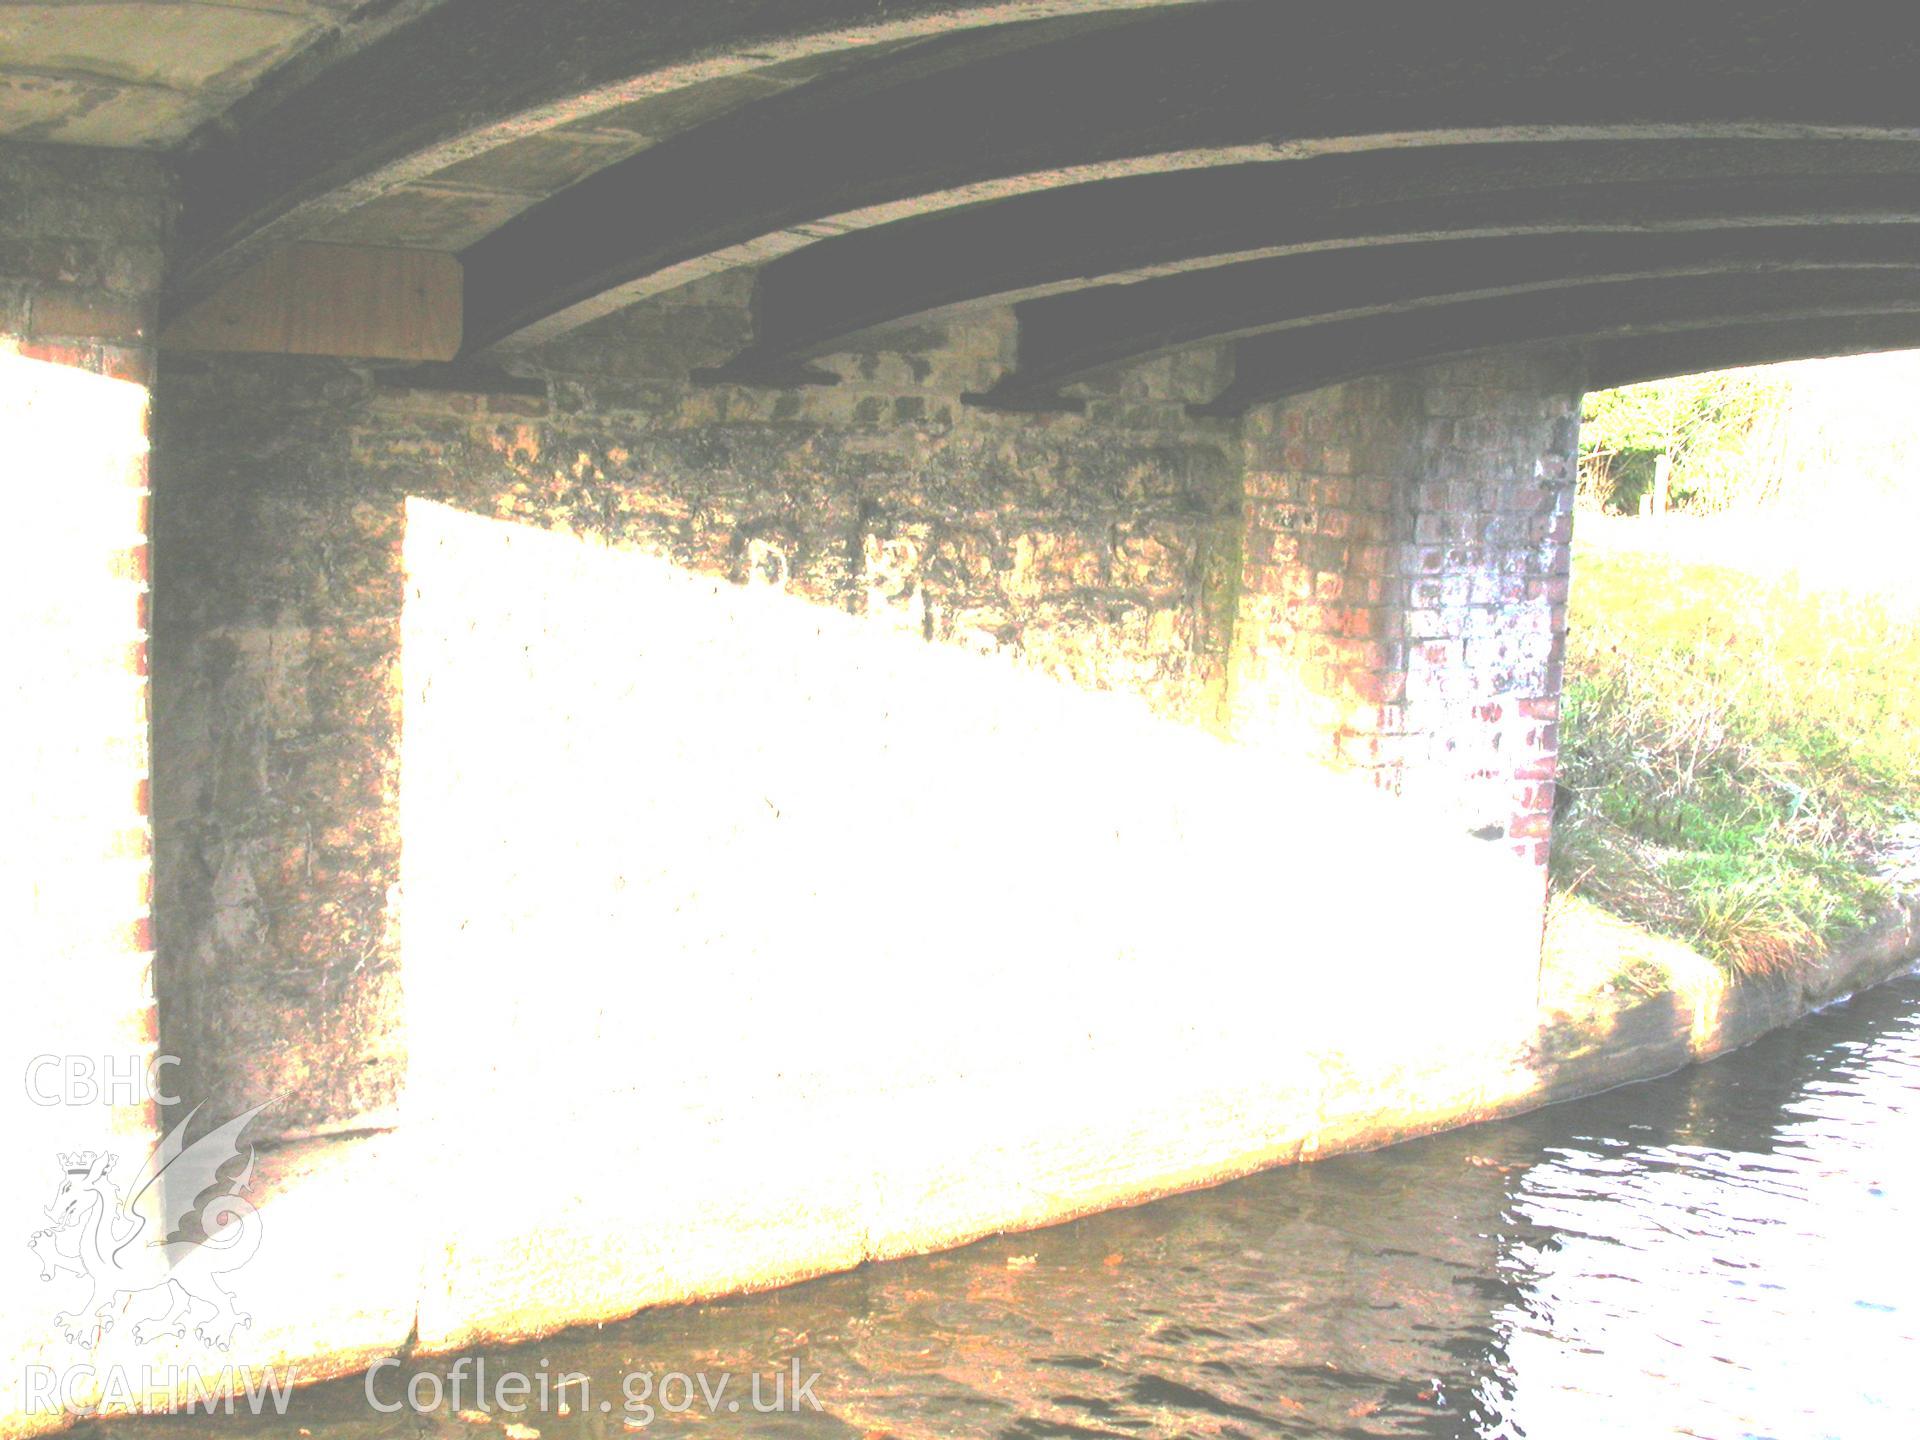 North-west abutment showing six of the seven iron ribs supporting the segmental stone arch.